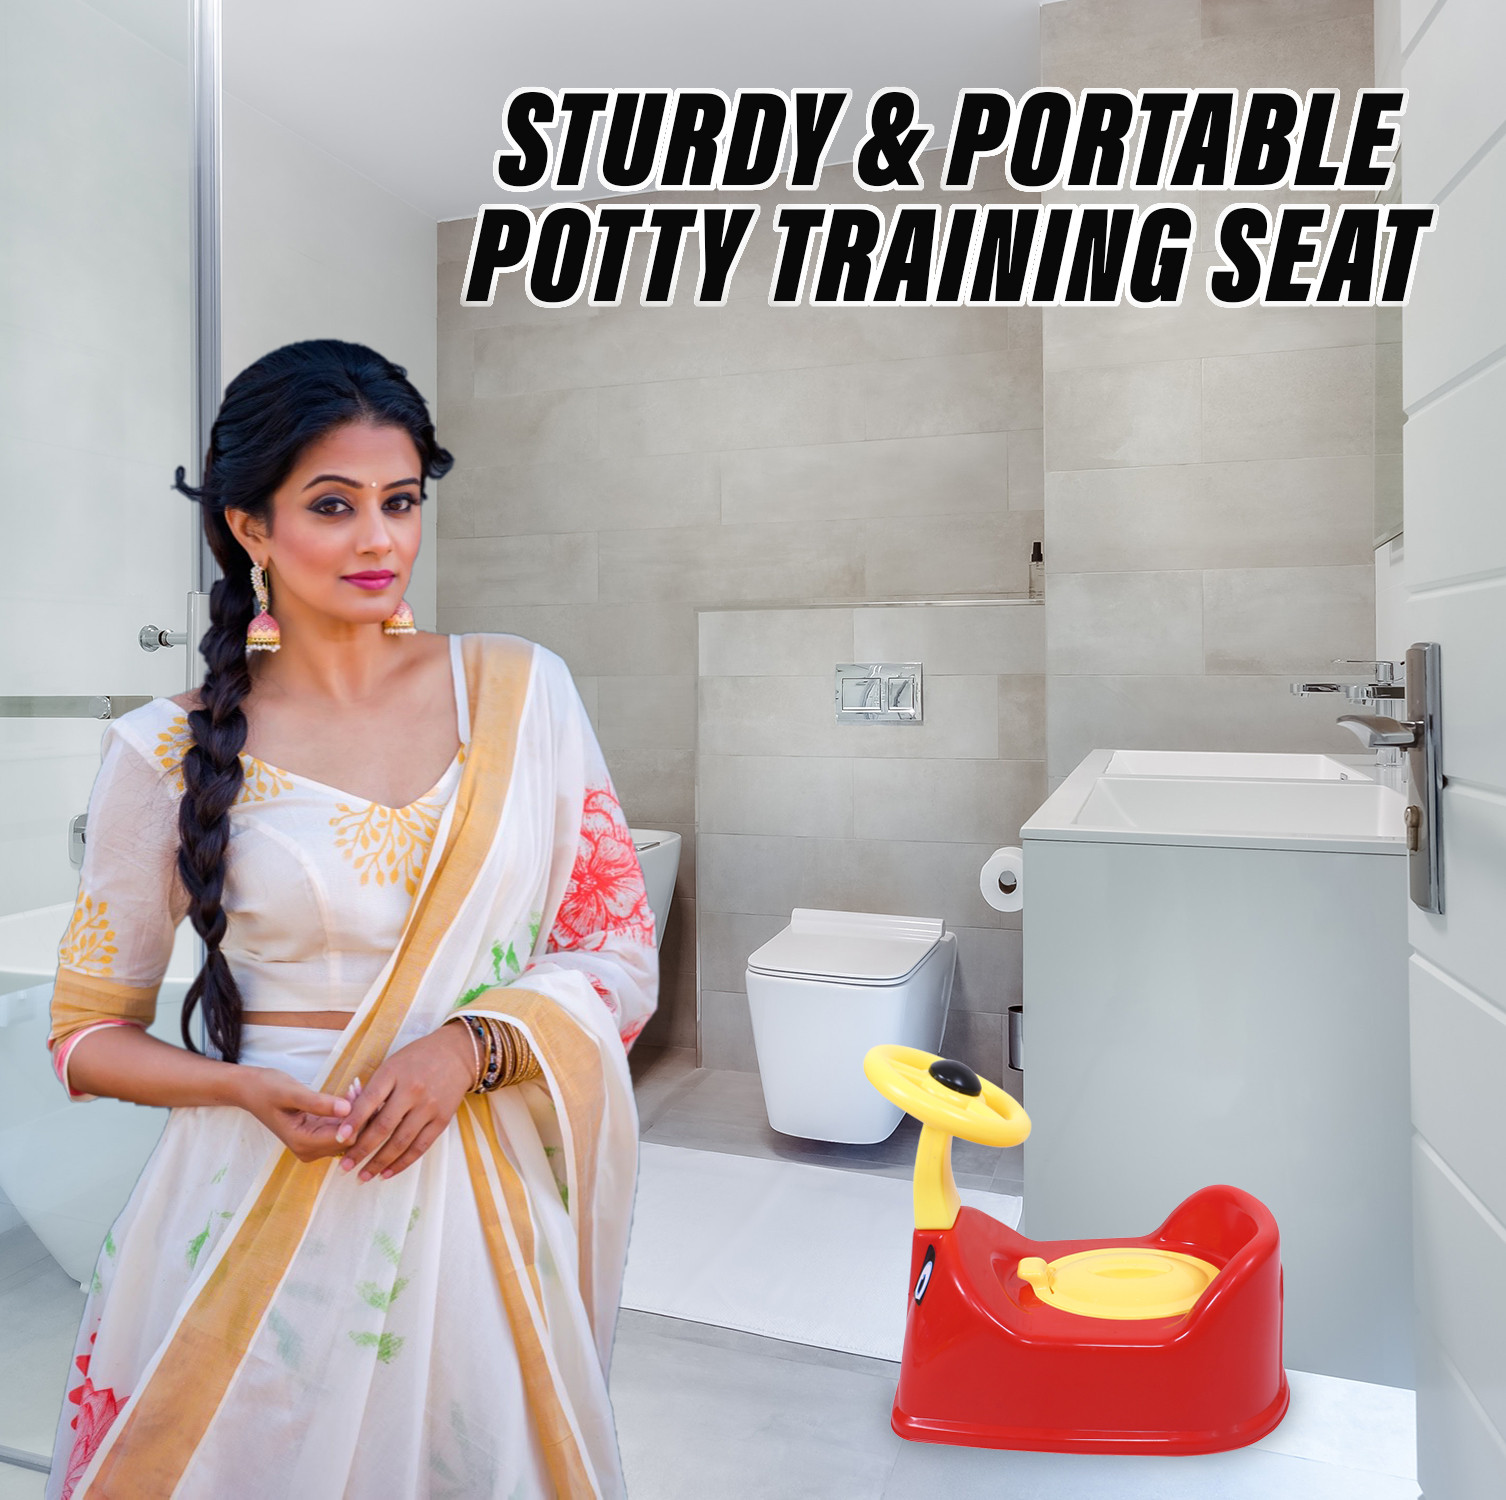 Kuber Industries Potty Toilet Trainer Seat | Plastic Potty Training Seat | Baby Potty Seat | Potty Seat For Child | Potty Training Seat for Kids | Steering Design | Red